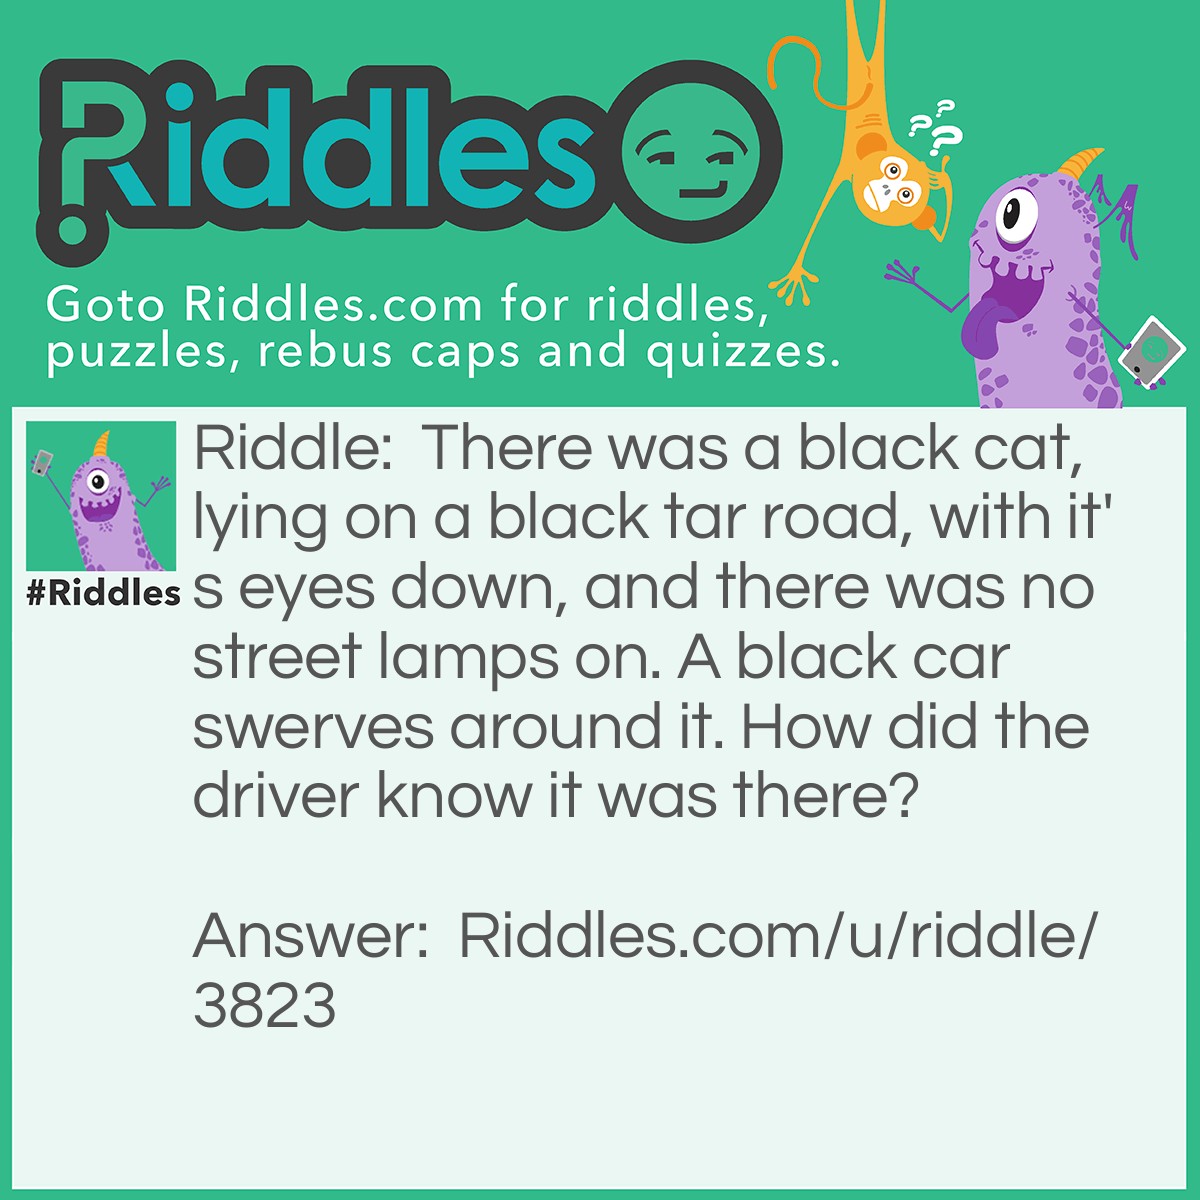 Riddle: There was a black cat, lying on a black tar road, with it's eyes down, and there was no street lamps on. A black car swerves around it. How did the driver know it was there? Answer: It was daytime.